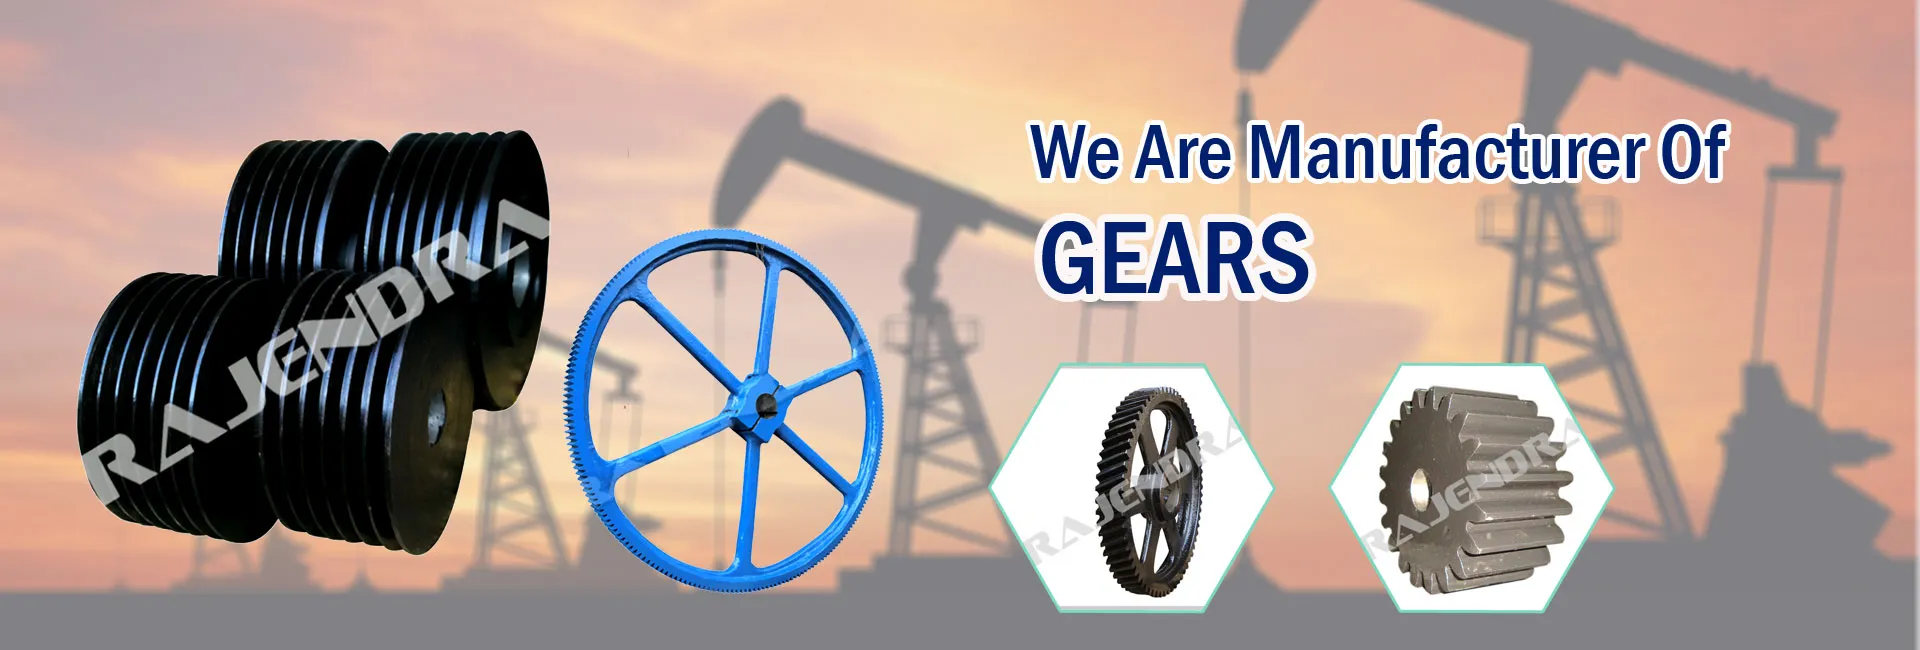 Gears Manufacturer in India.